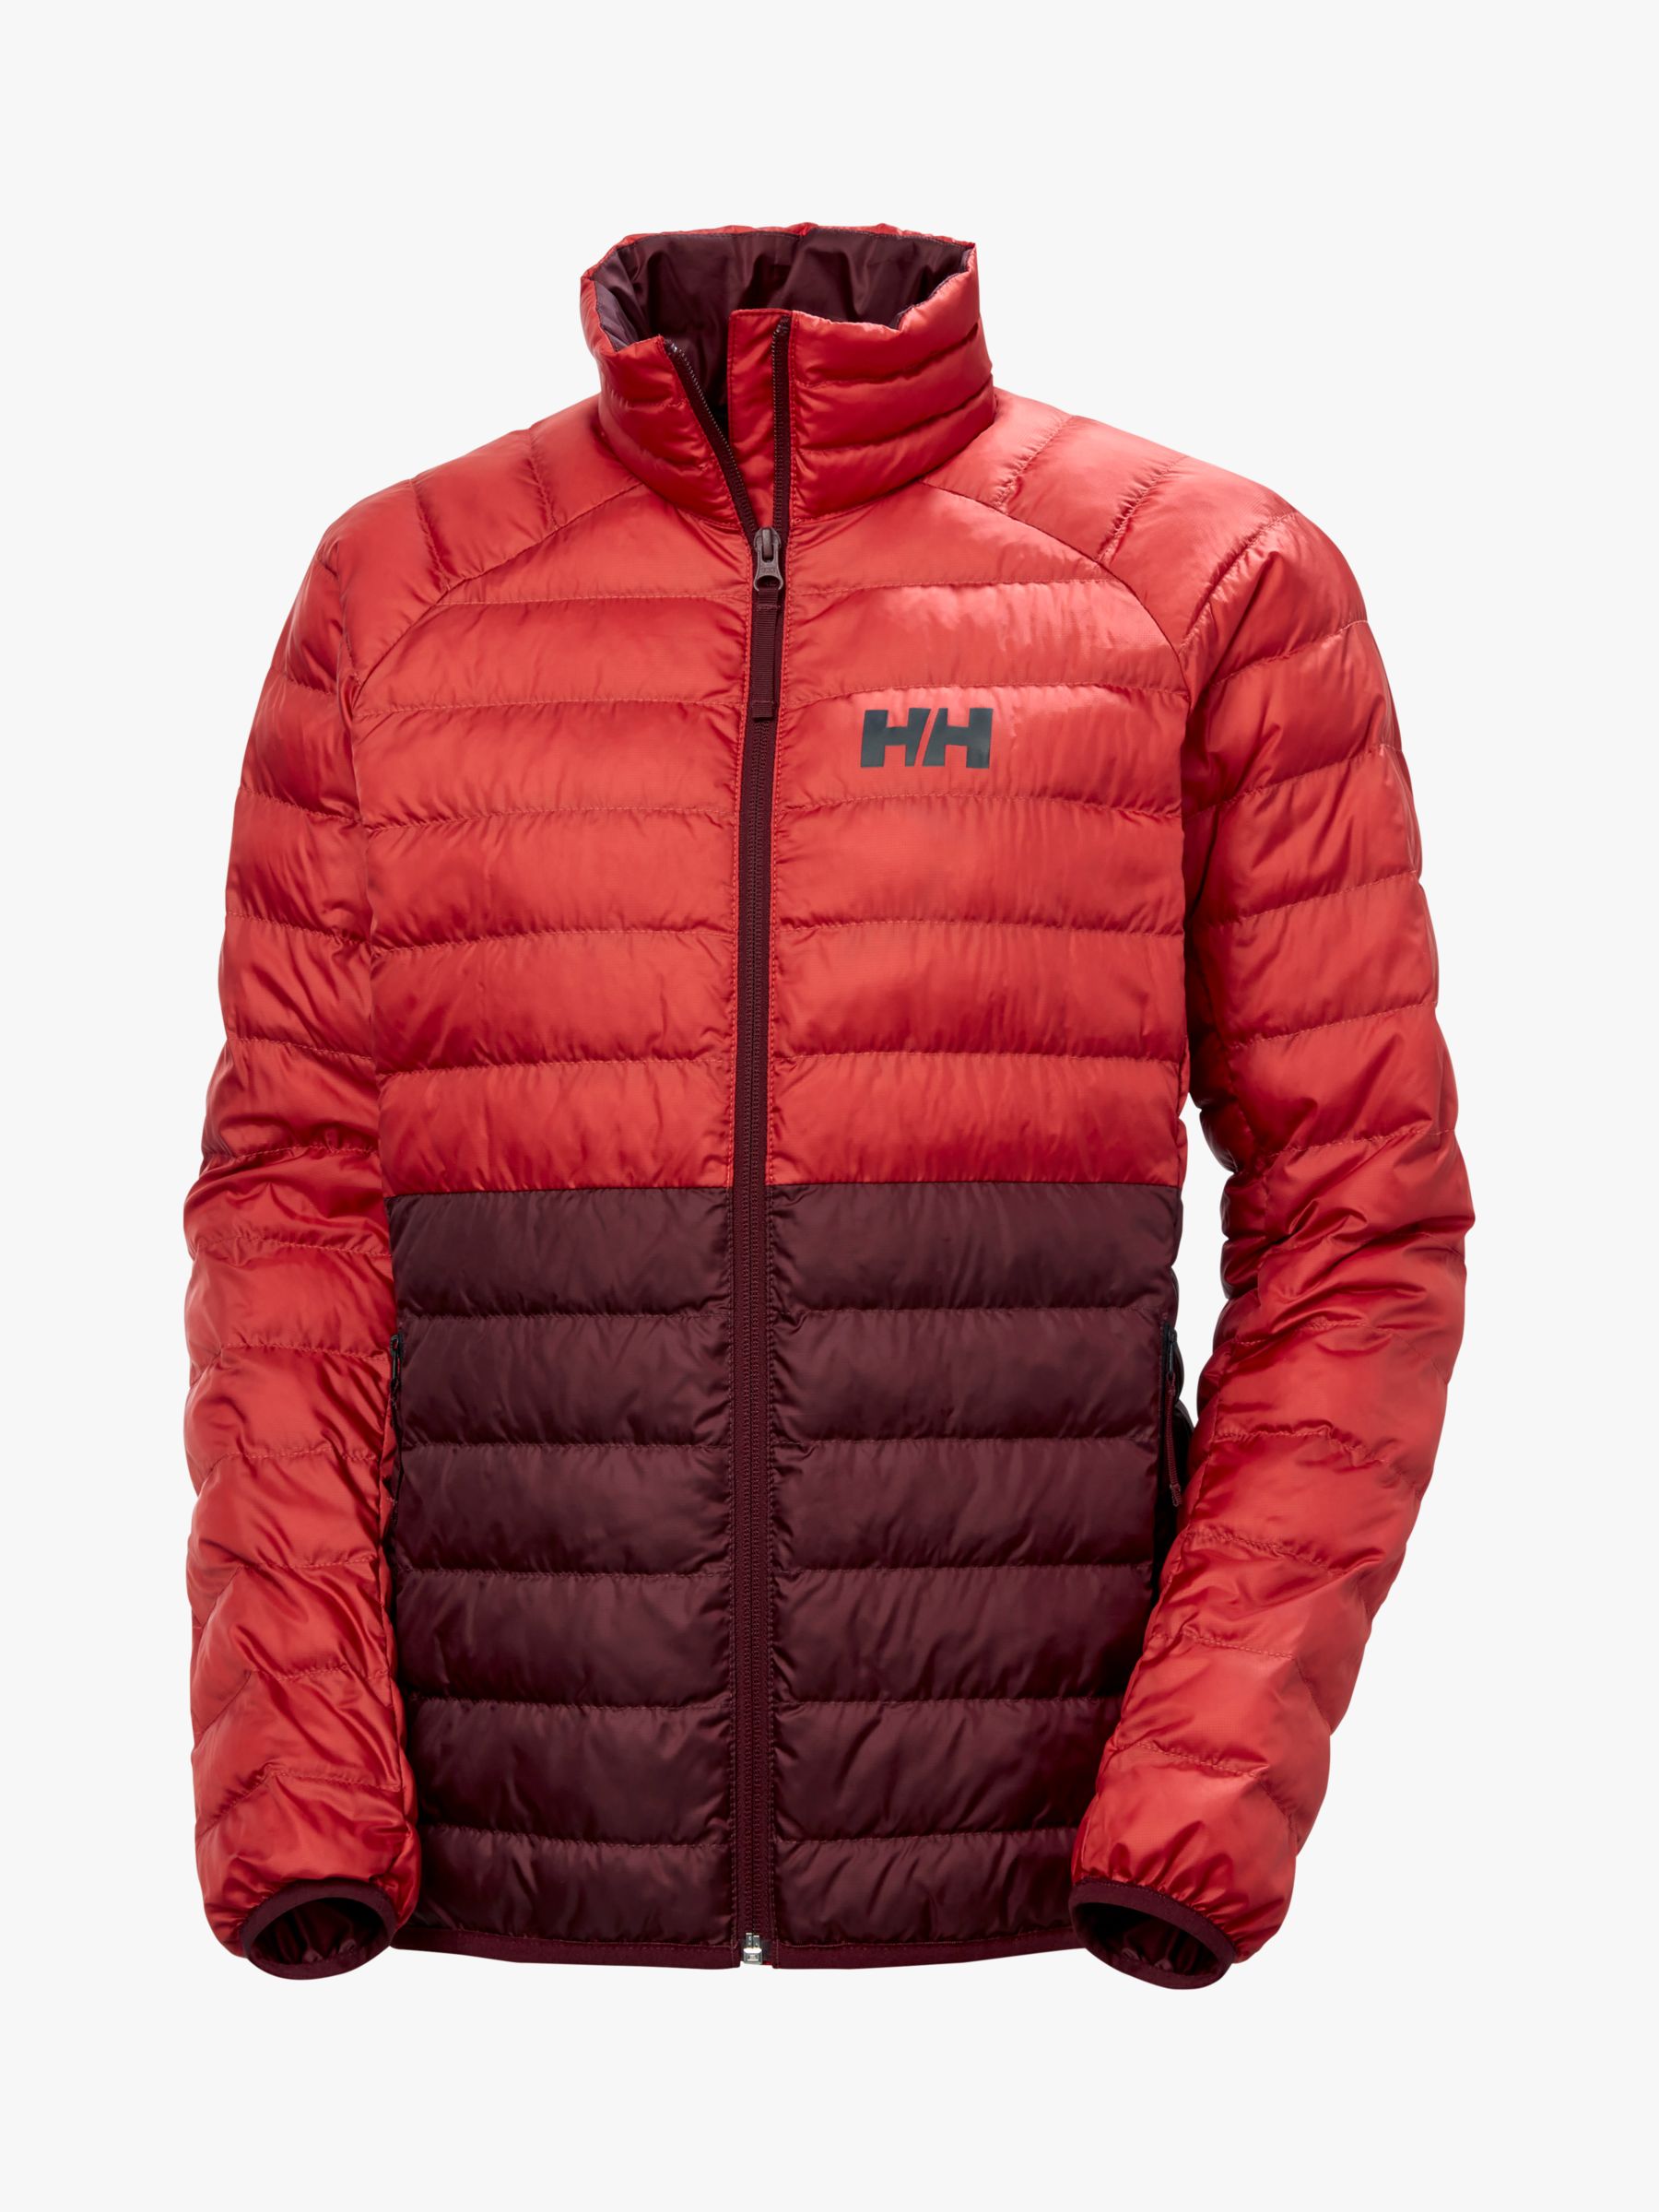 Helly Hansen Banff Women's Insulated Jacket, Hickory at John Lewis ...